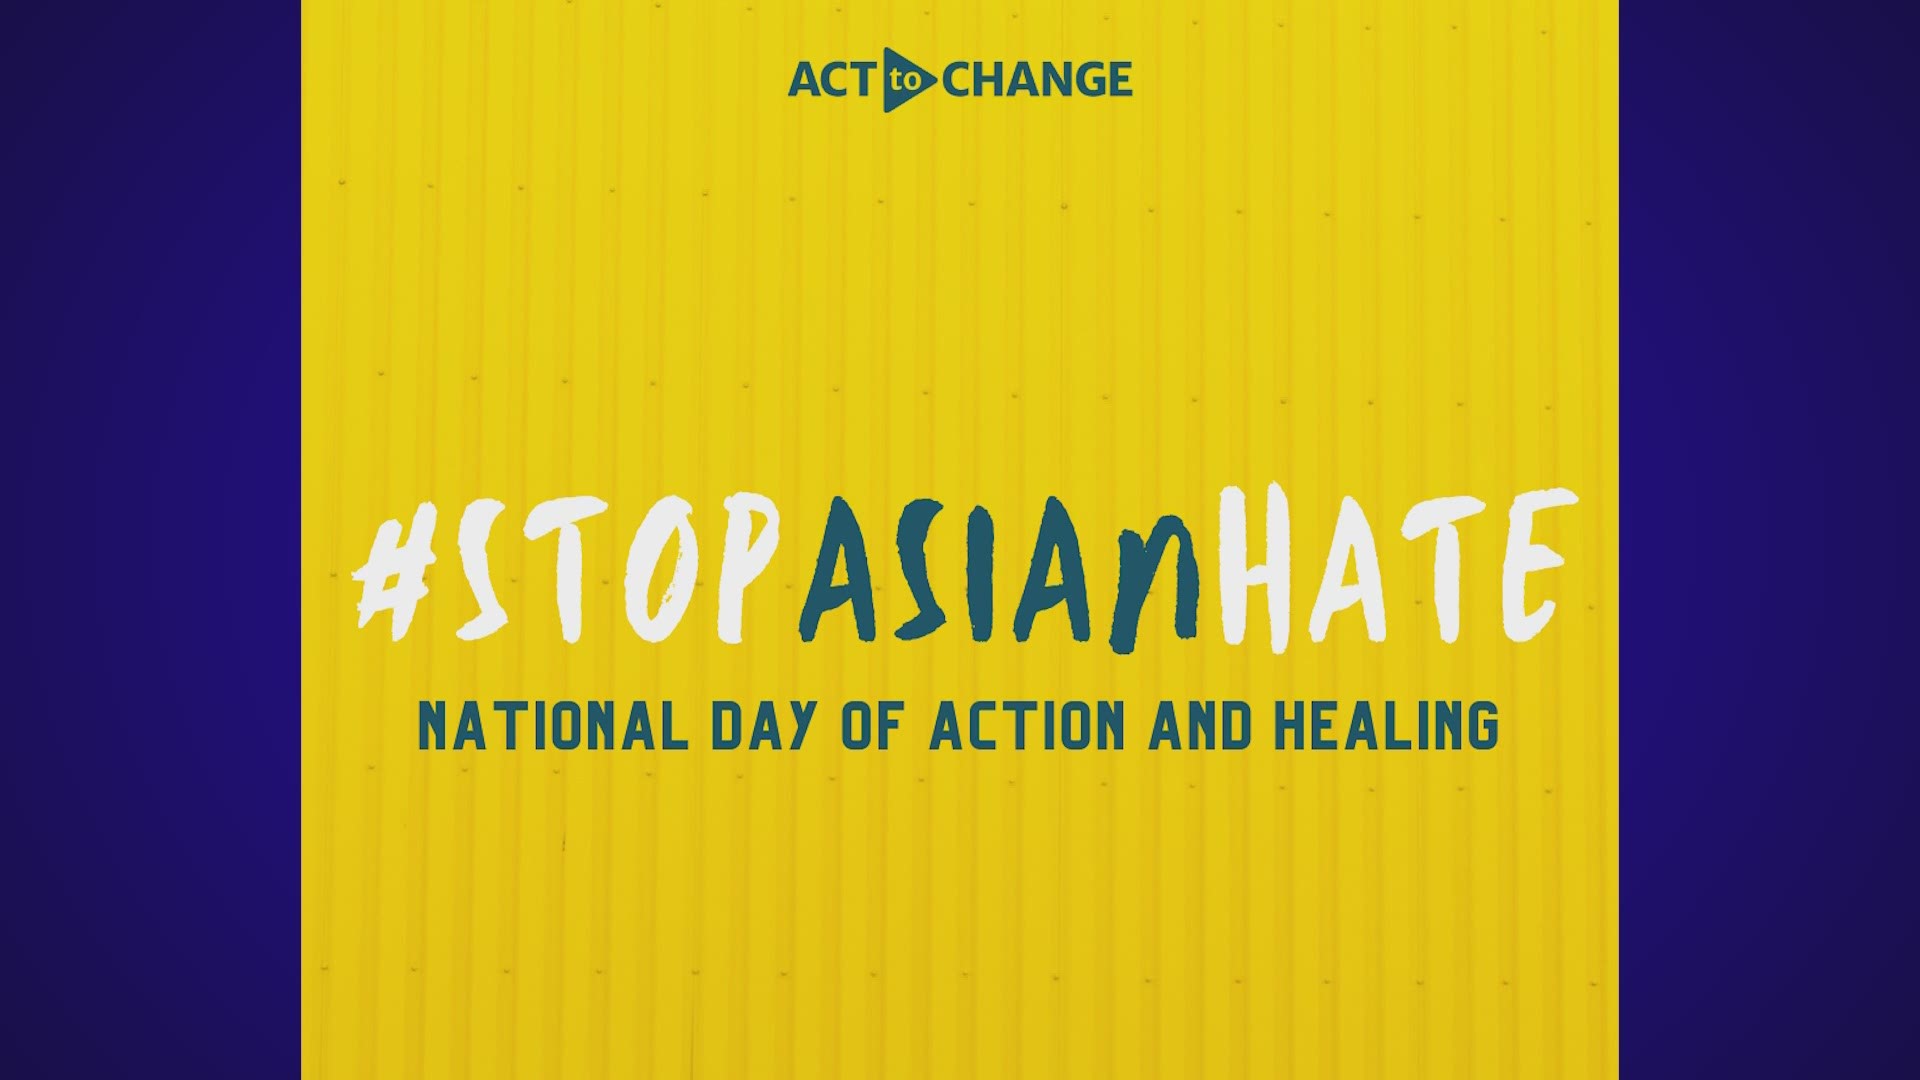 According to the National Council of Asian Pacific Americans, hate crimes against Asian Americans increased 150% in 2020.